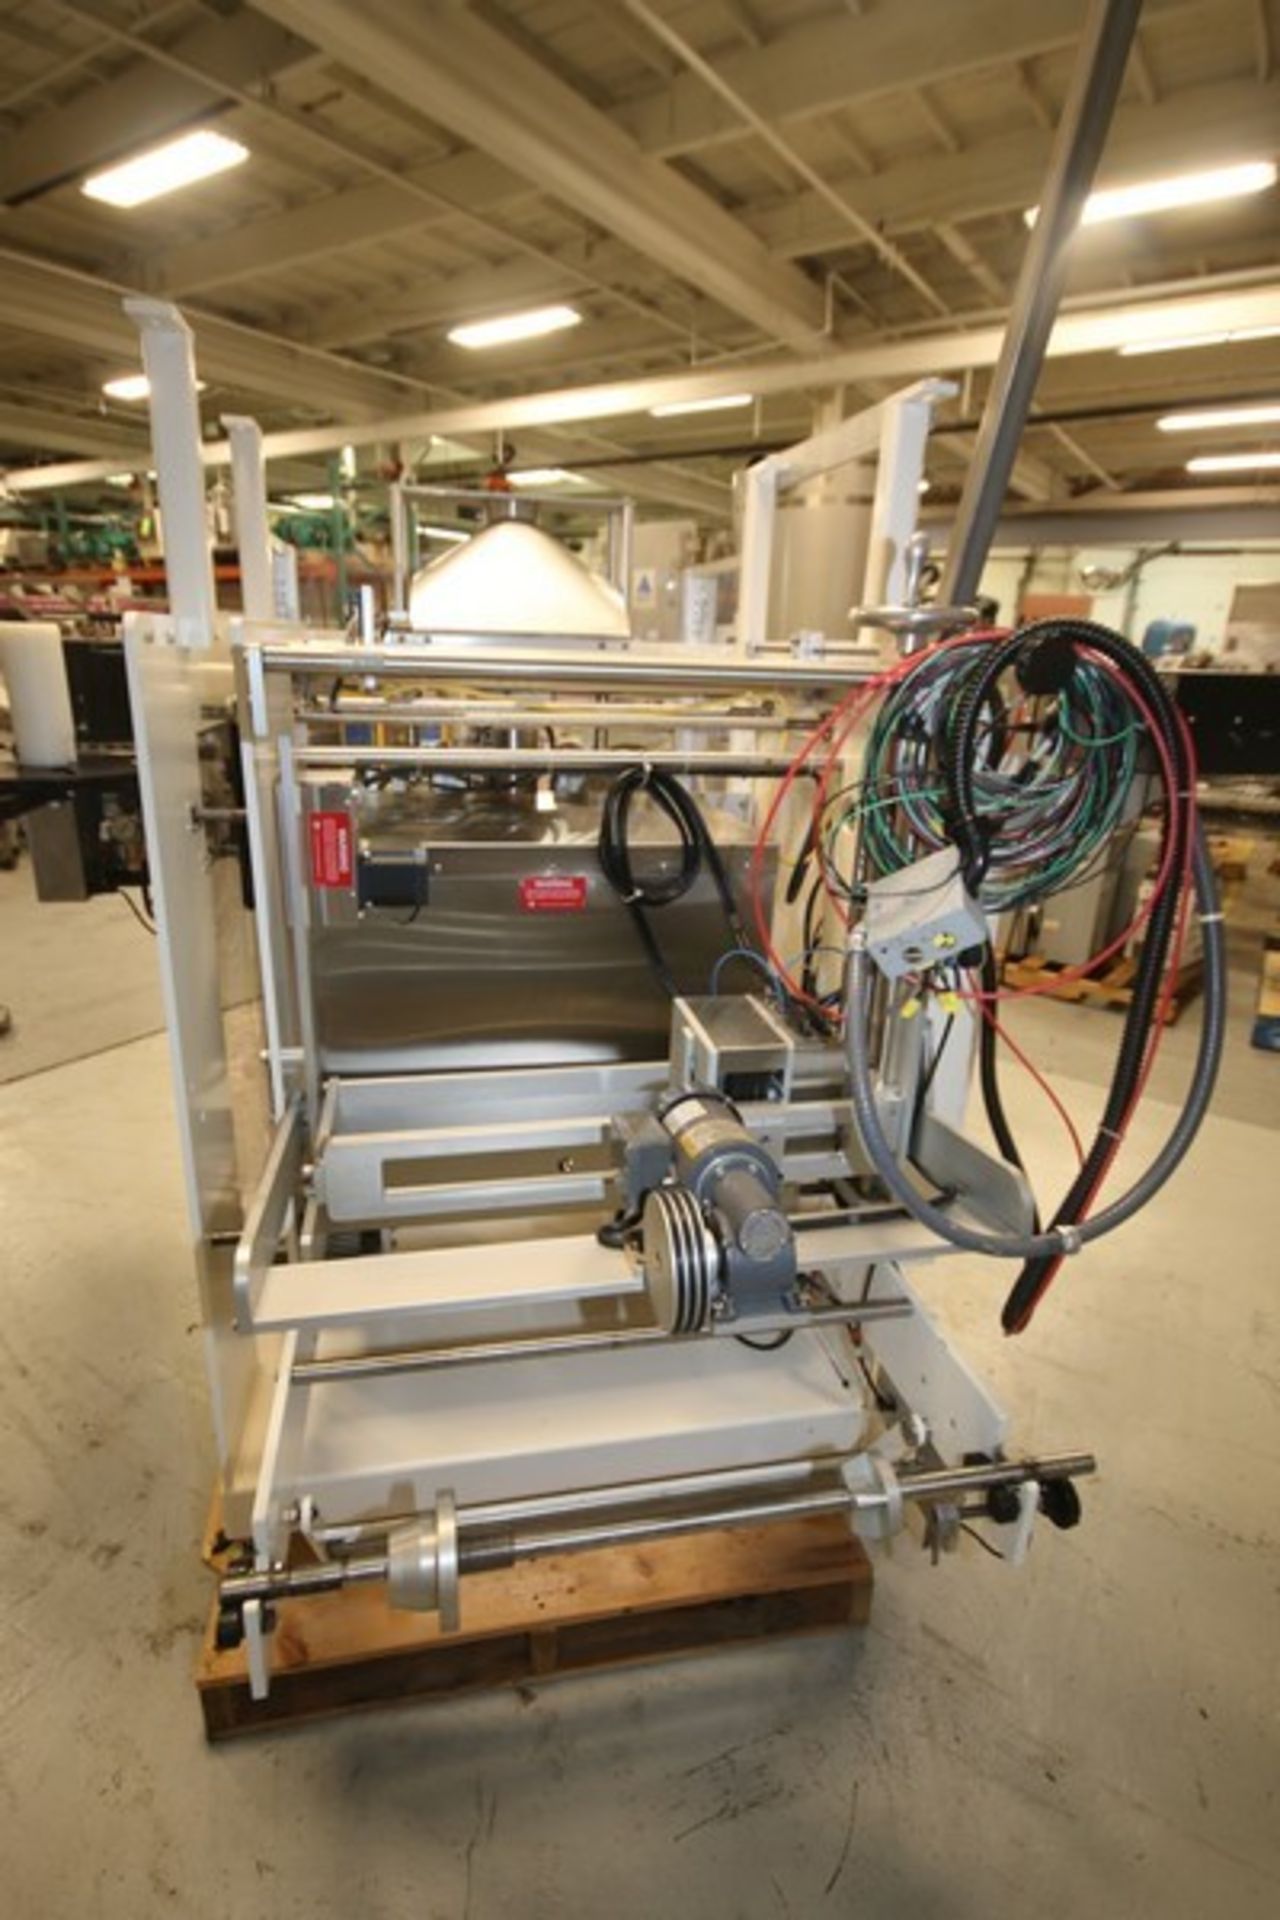 Universal Packaging Vertical Form Fill & Seal Packaging Machine (VFFS), Model S2000C, SN 1709, - Image 8 of 12